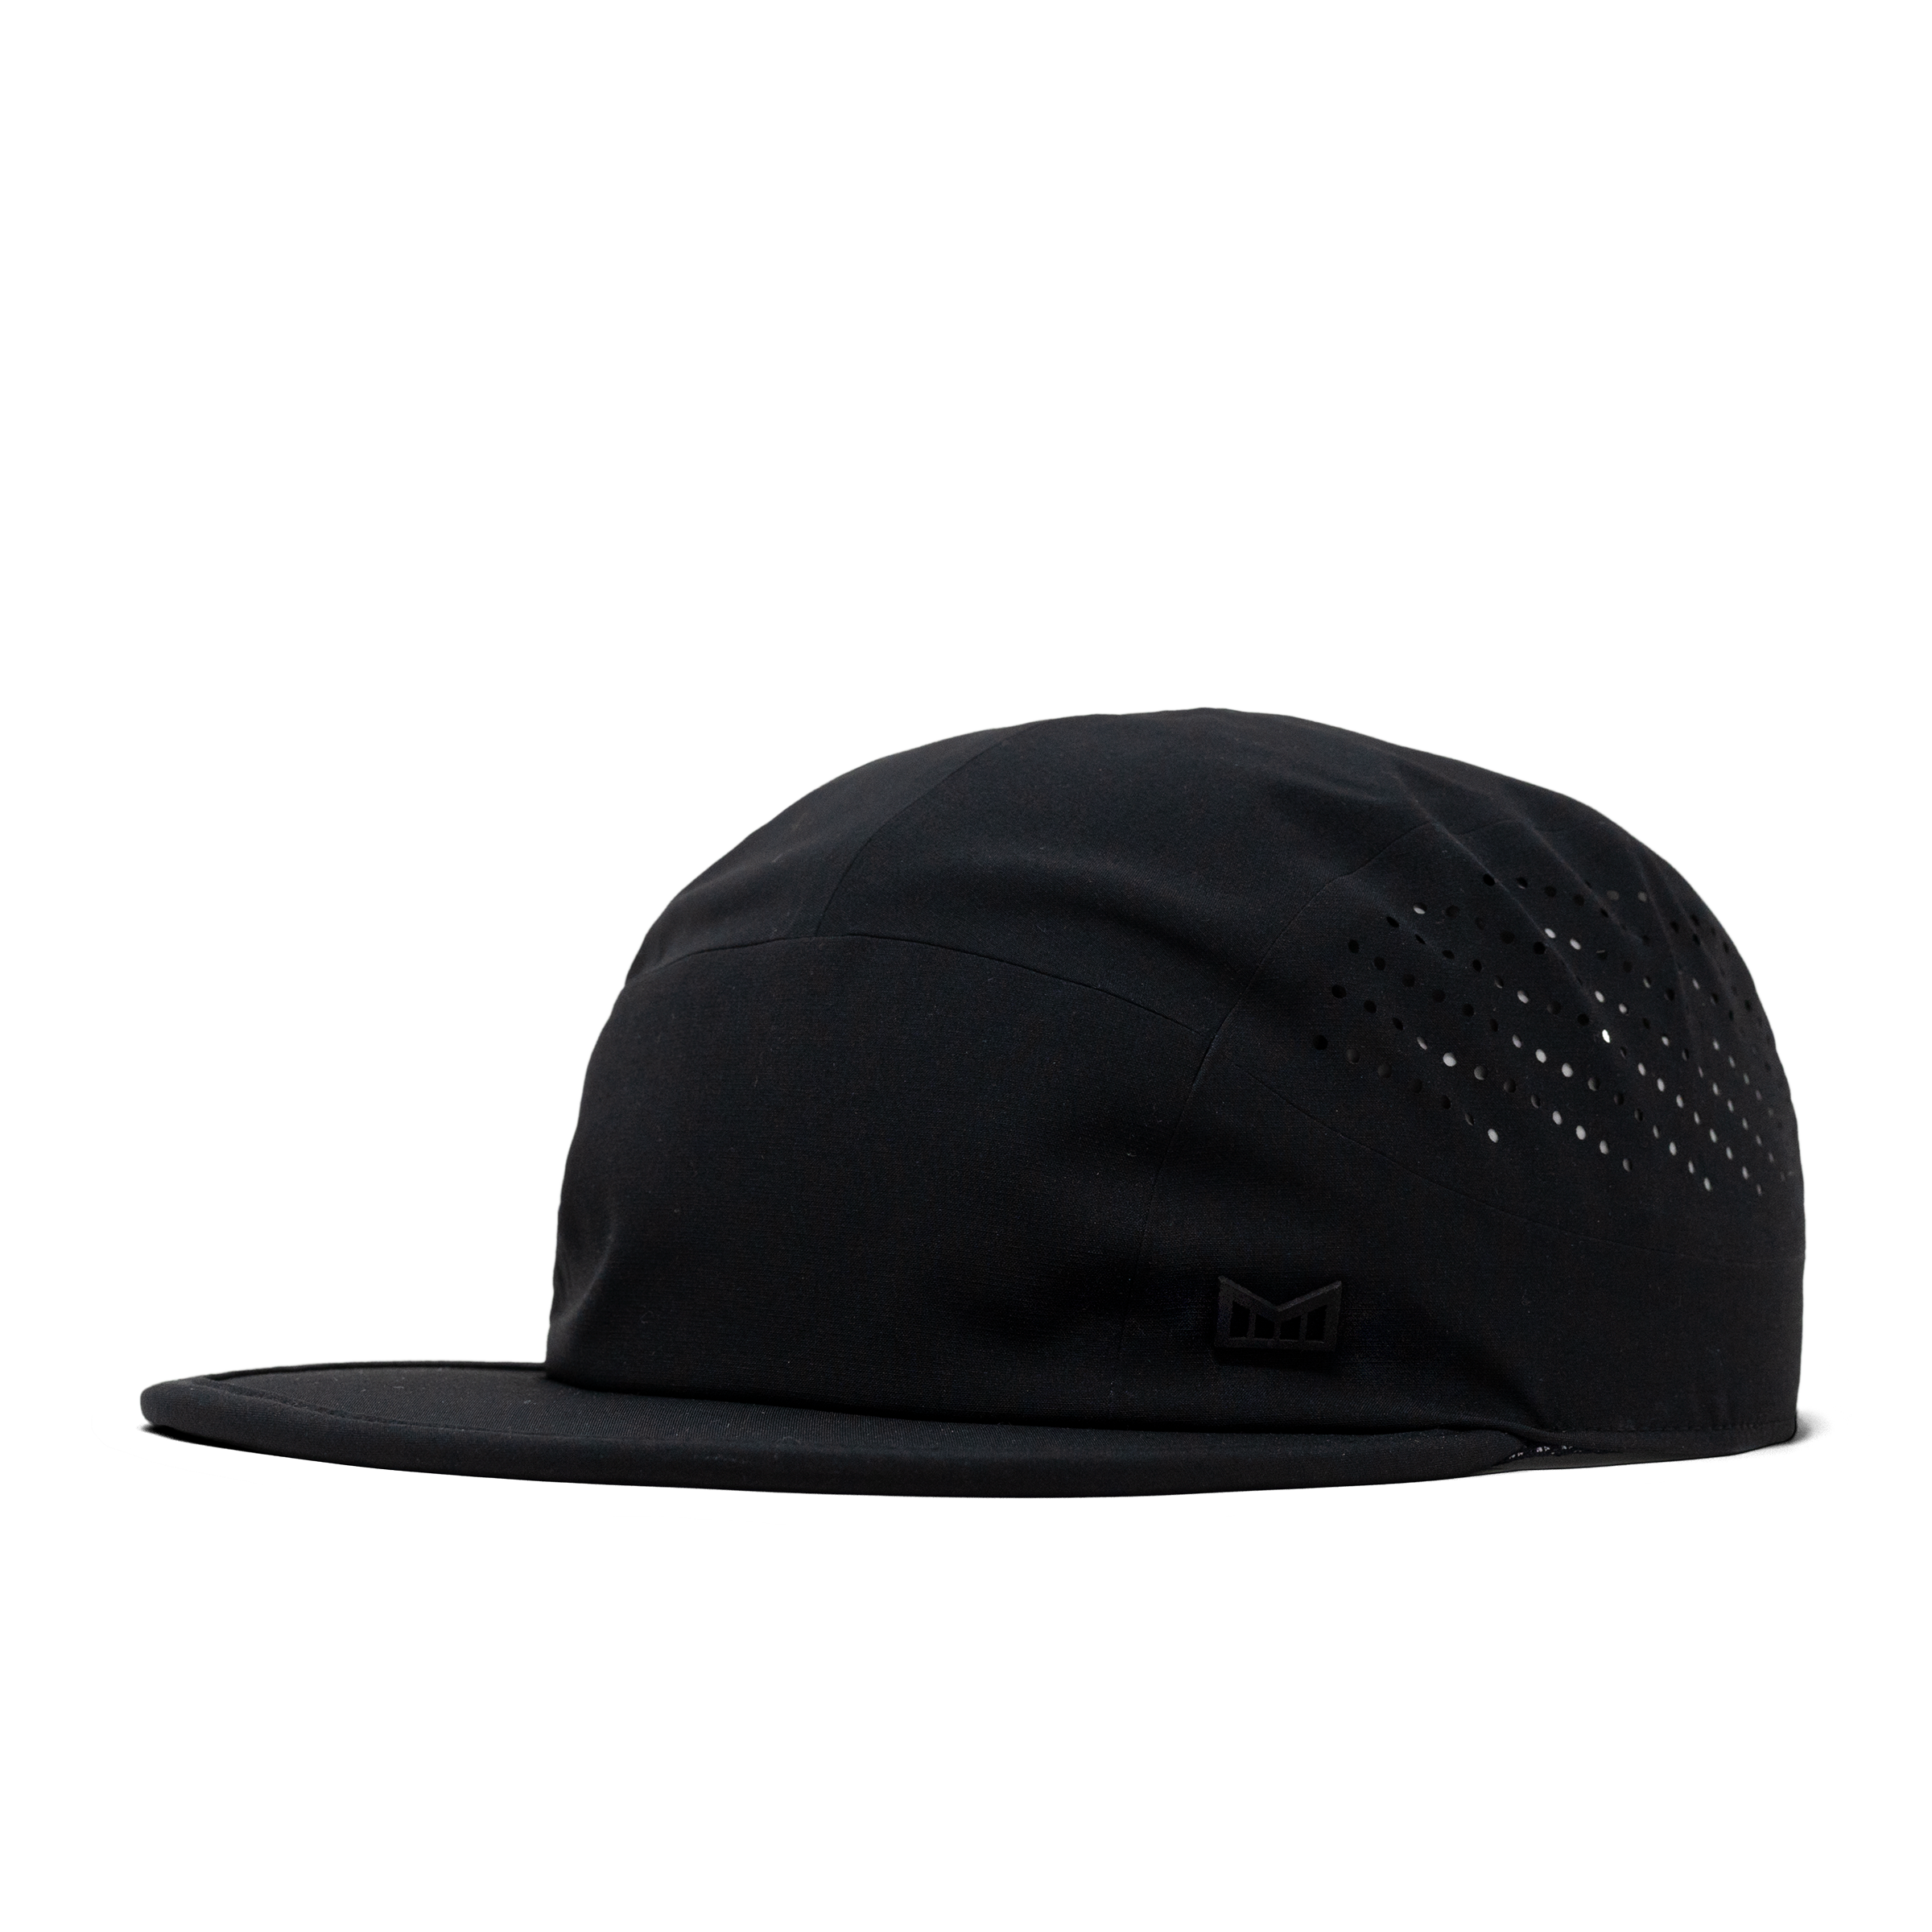 The angled view of the Melin Camper Fit Pace Hydro hat in black